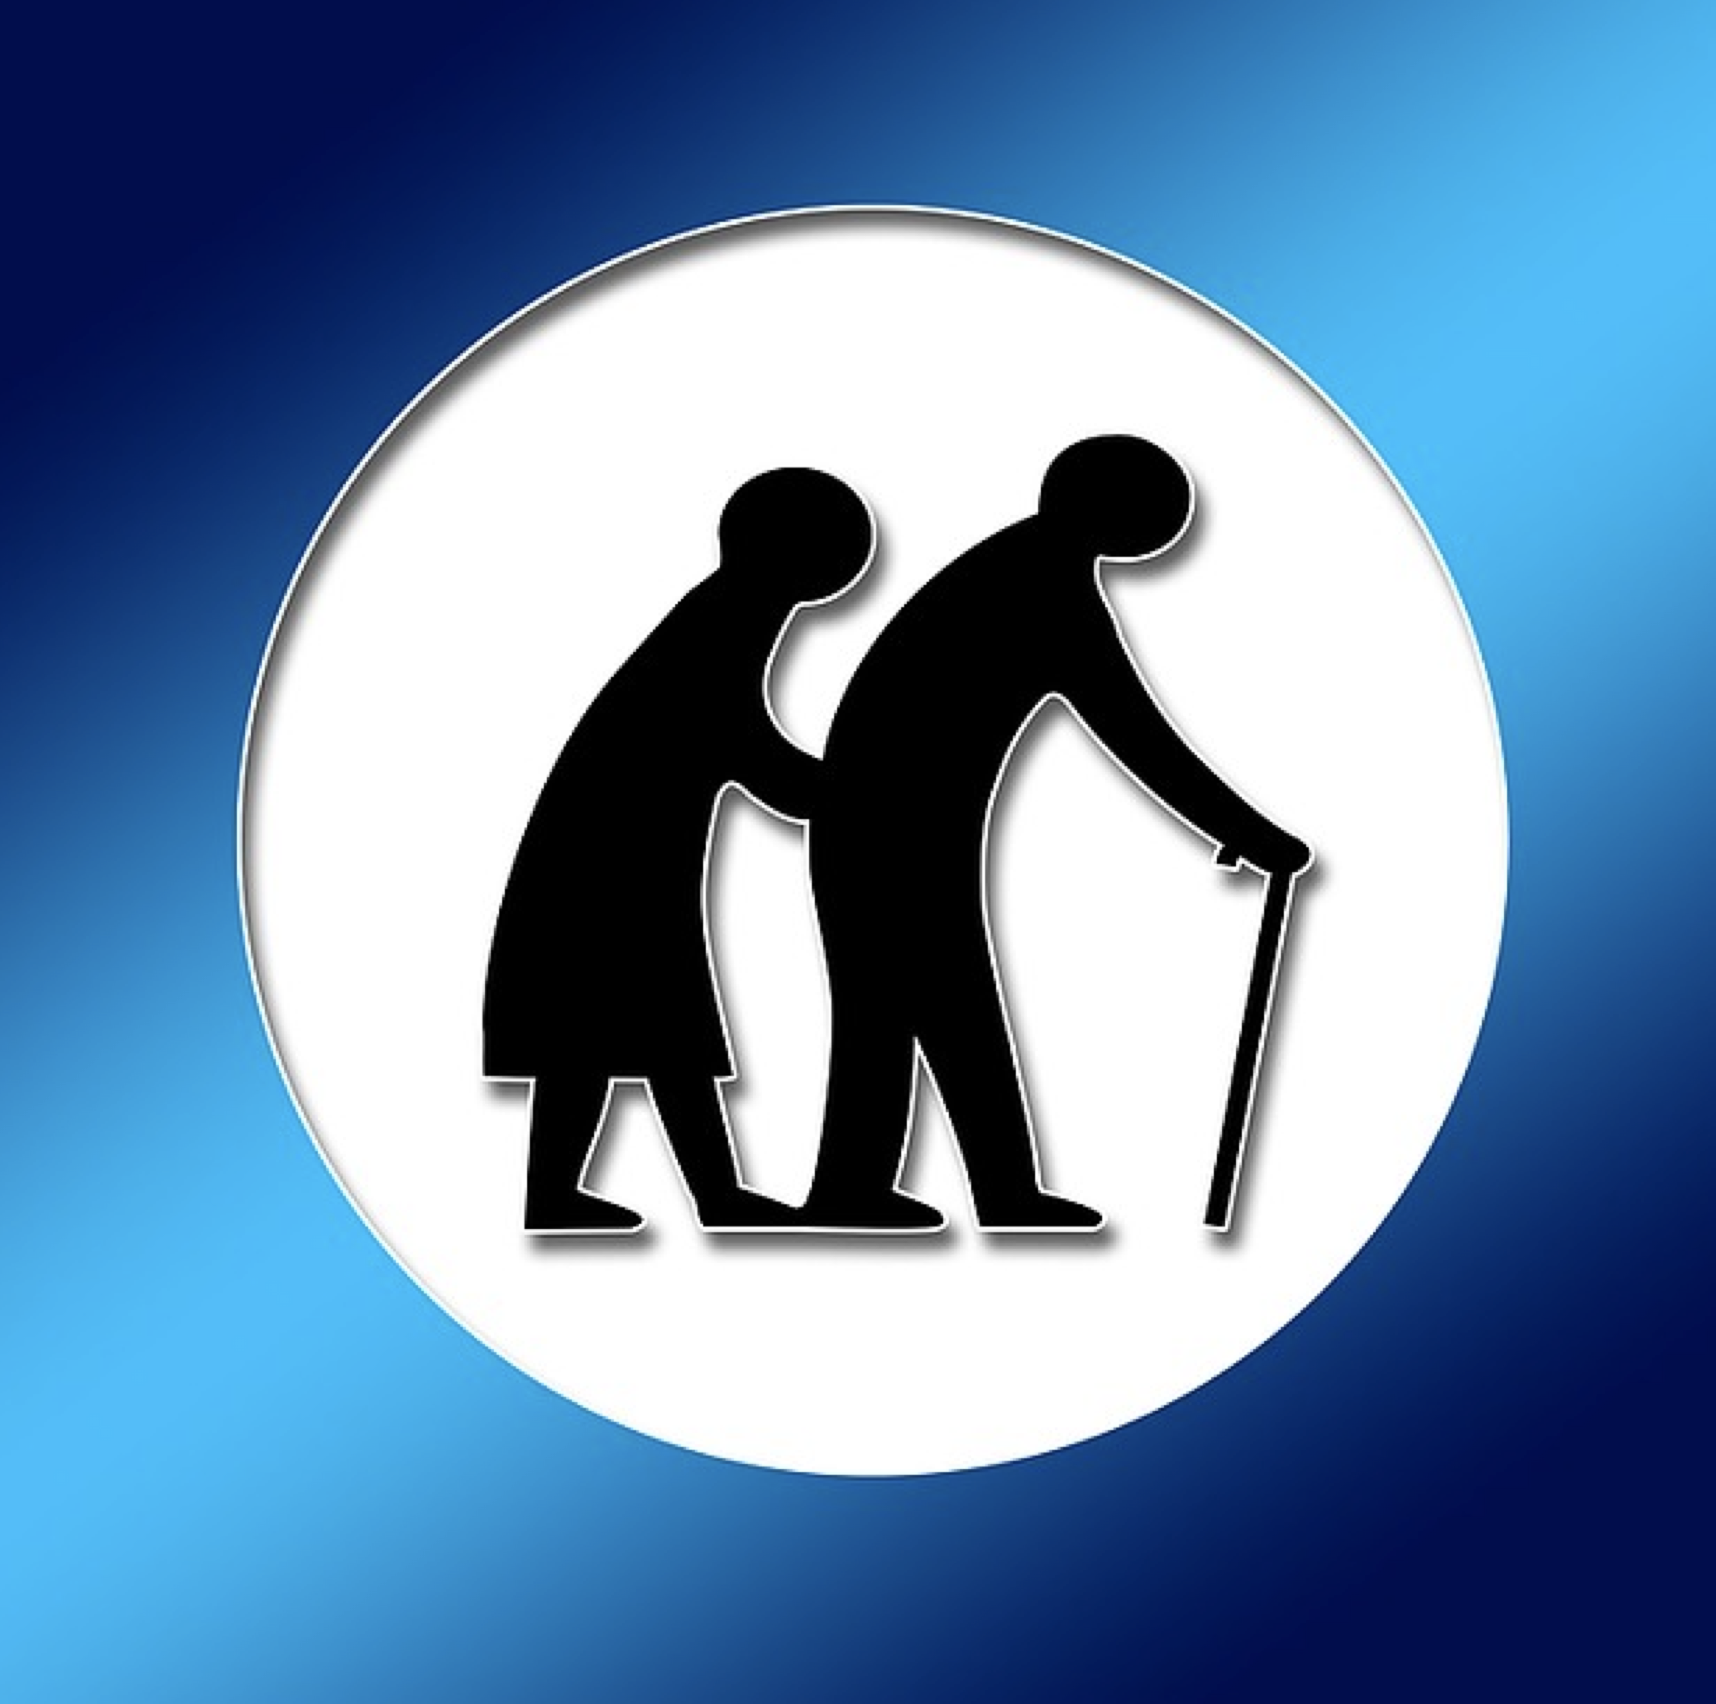 Image of an older couple walking with a cane